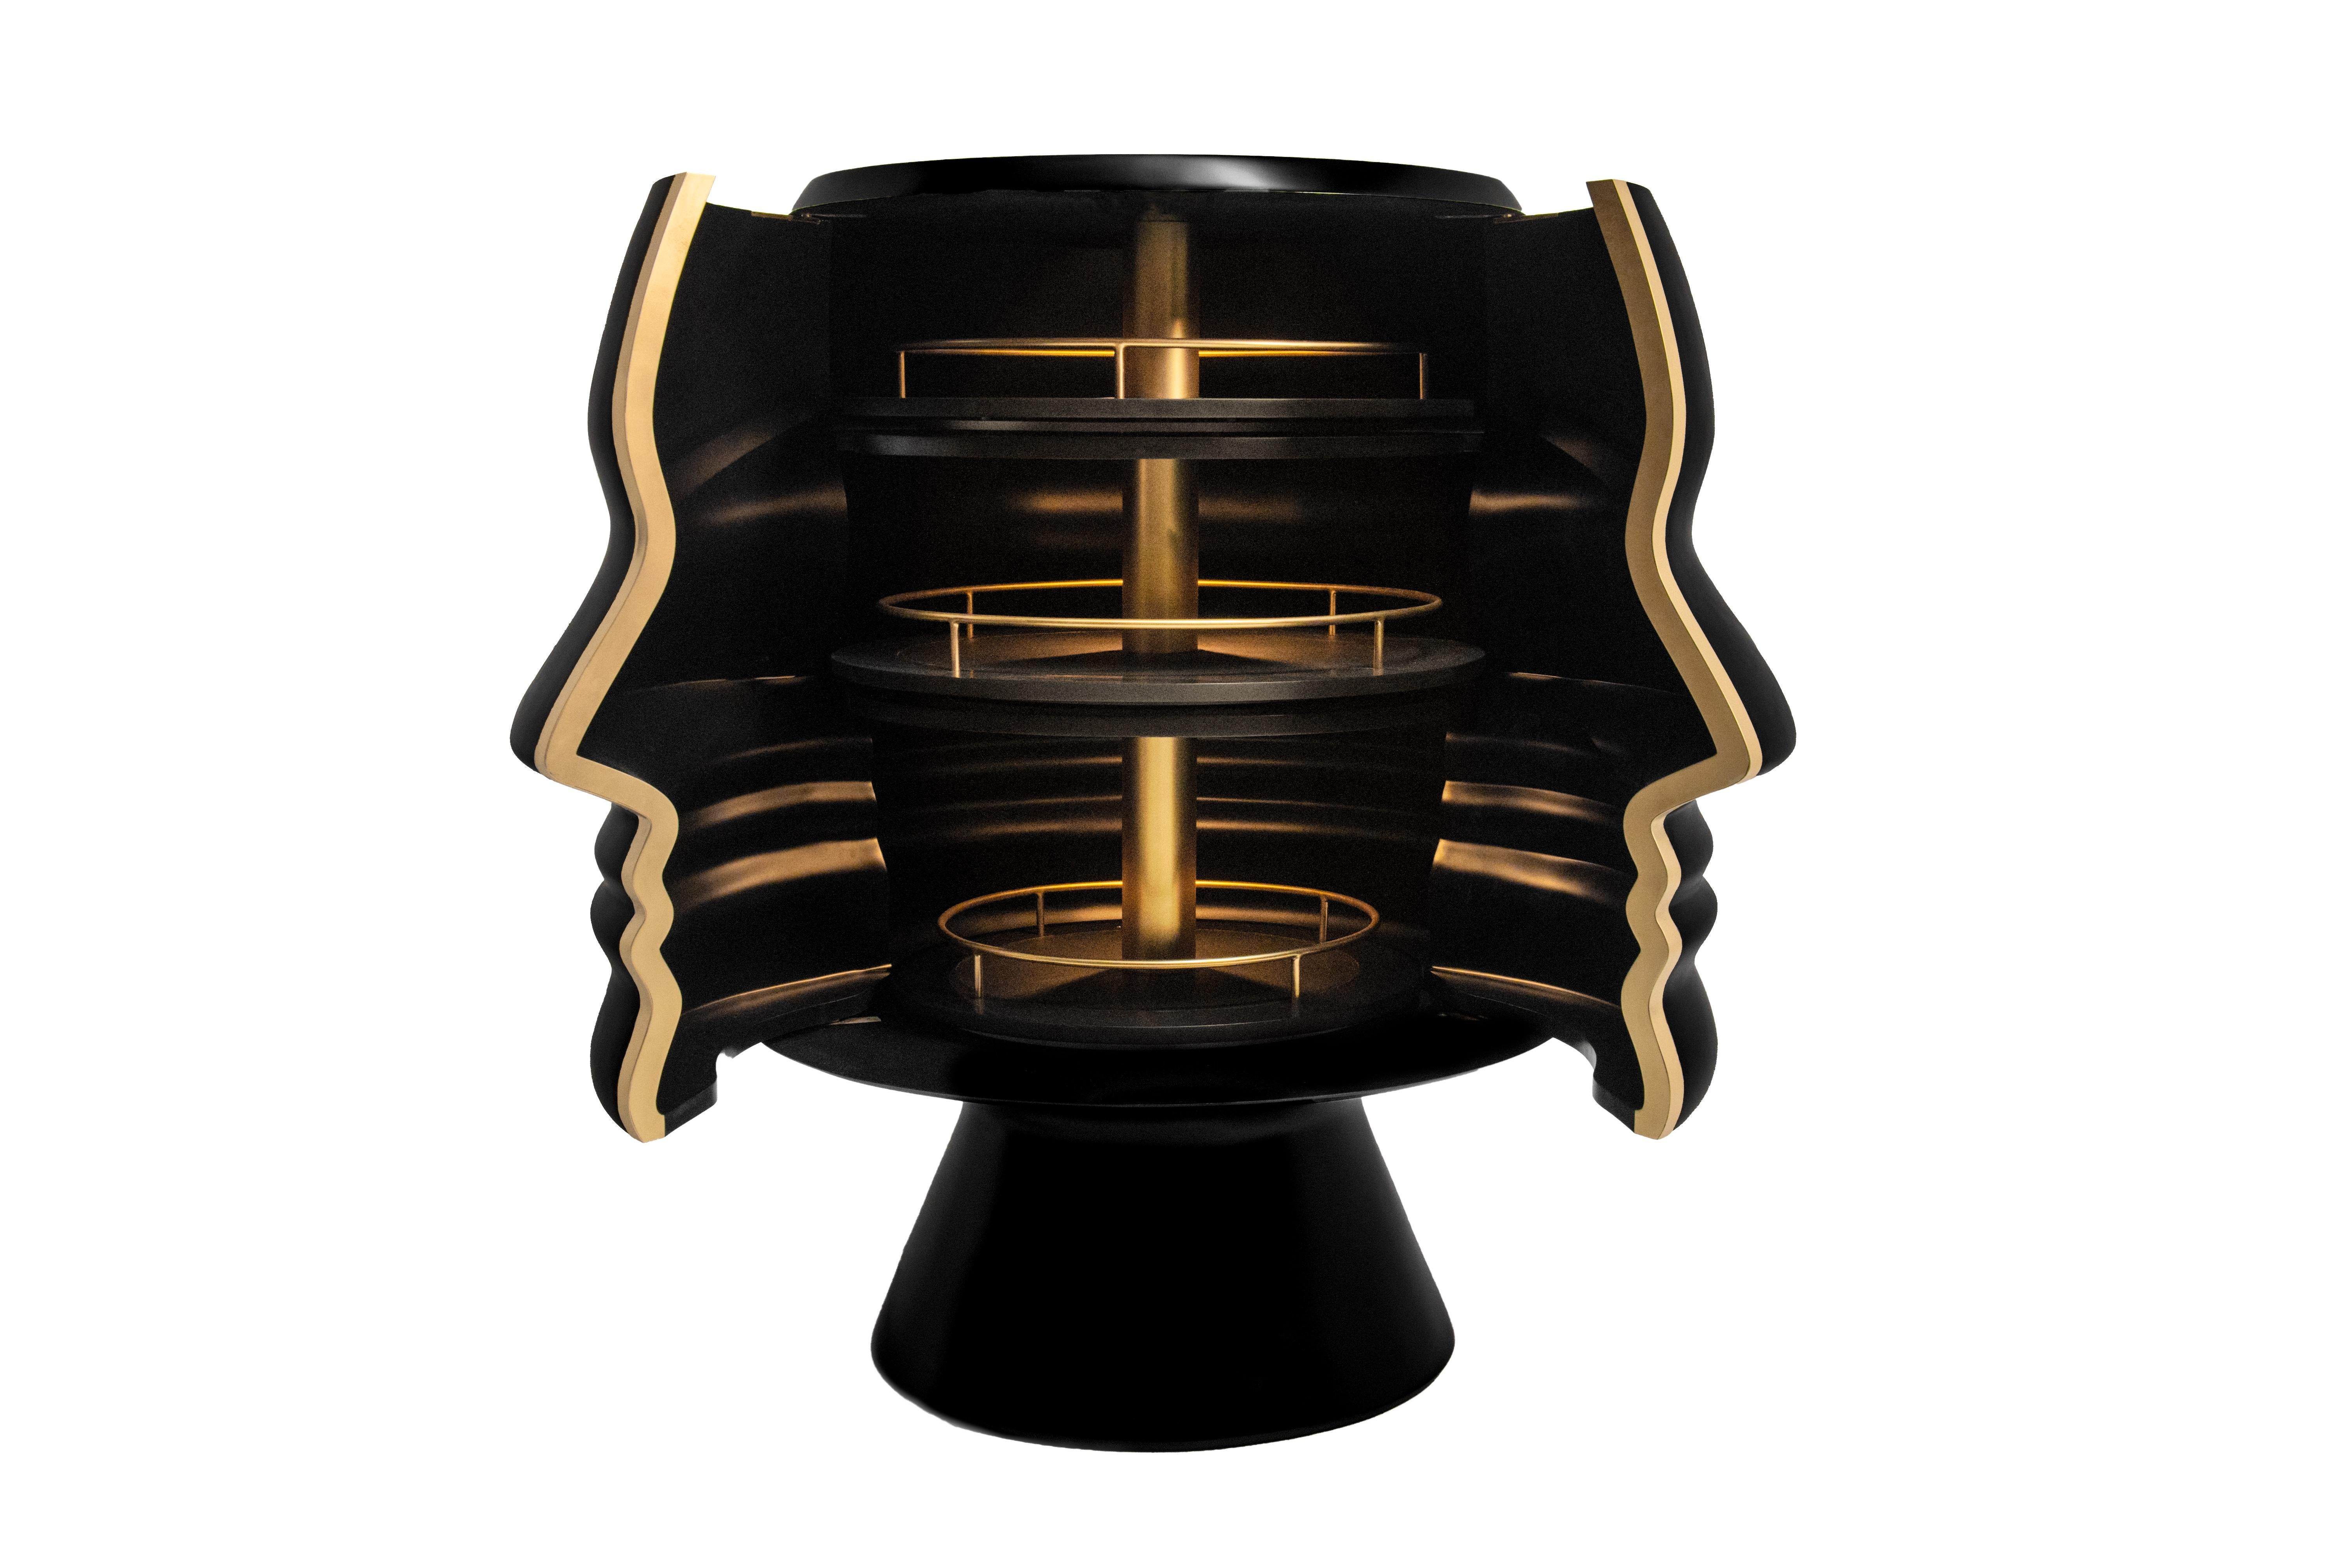 A head that stands out in a crowded room, Ego is not just any cabinet, it’s the one that introduces you to your alter Ego. Be free to live the life you do in the comfort of your mind. The beautiful black Ego Cabinet with gold trims gently outlines